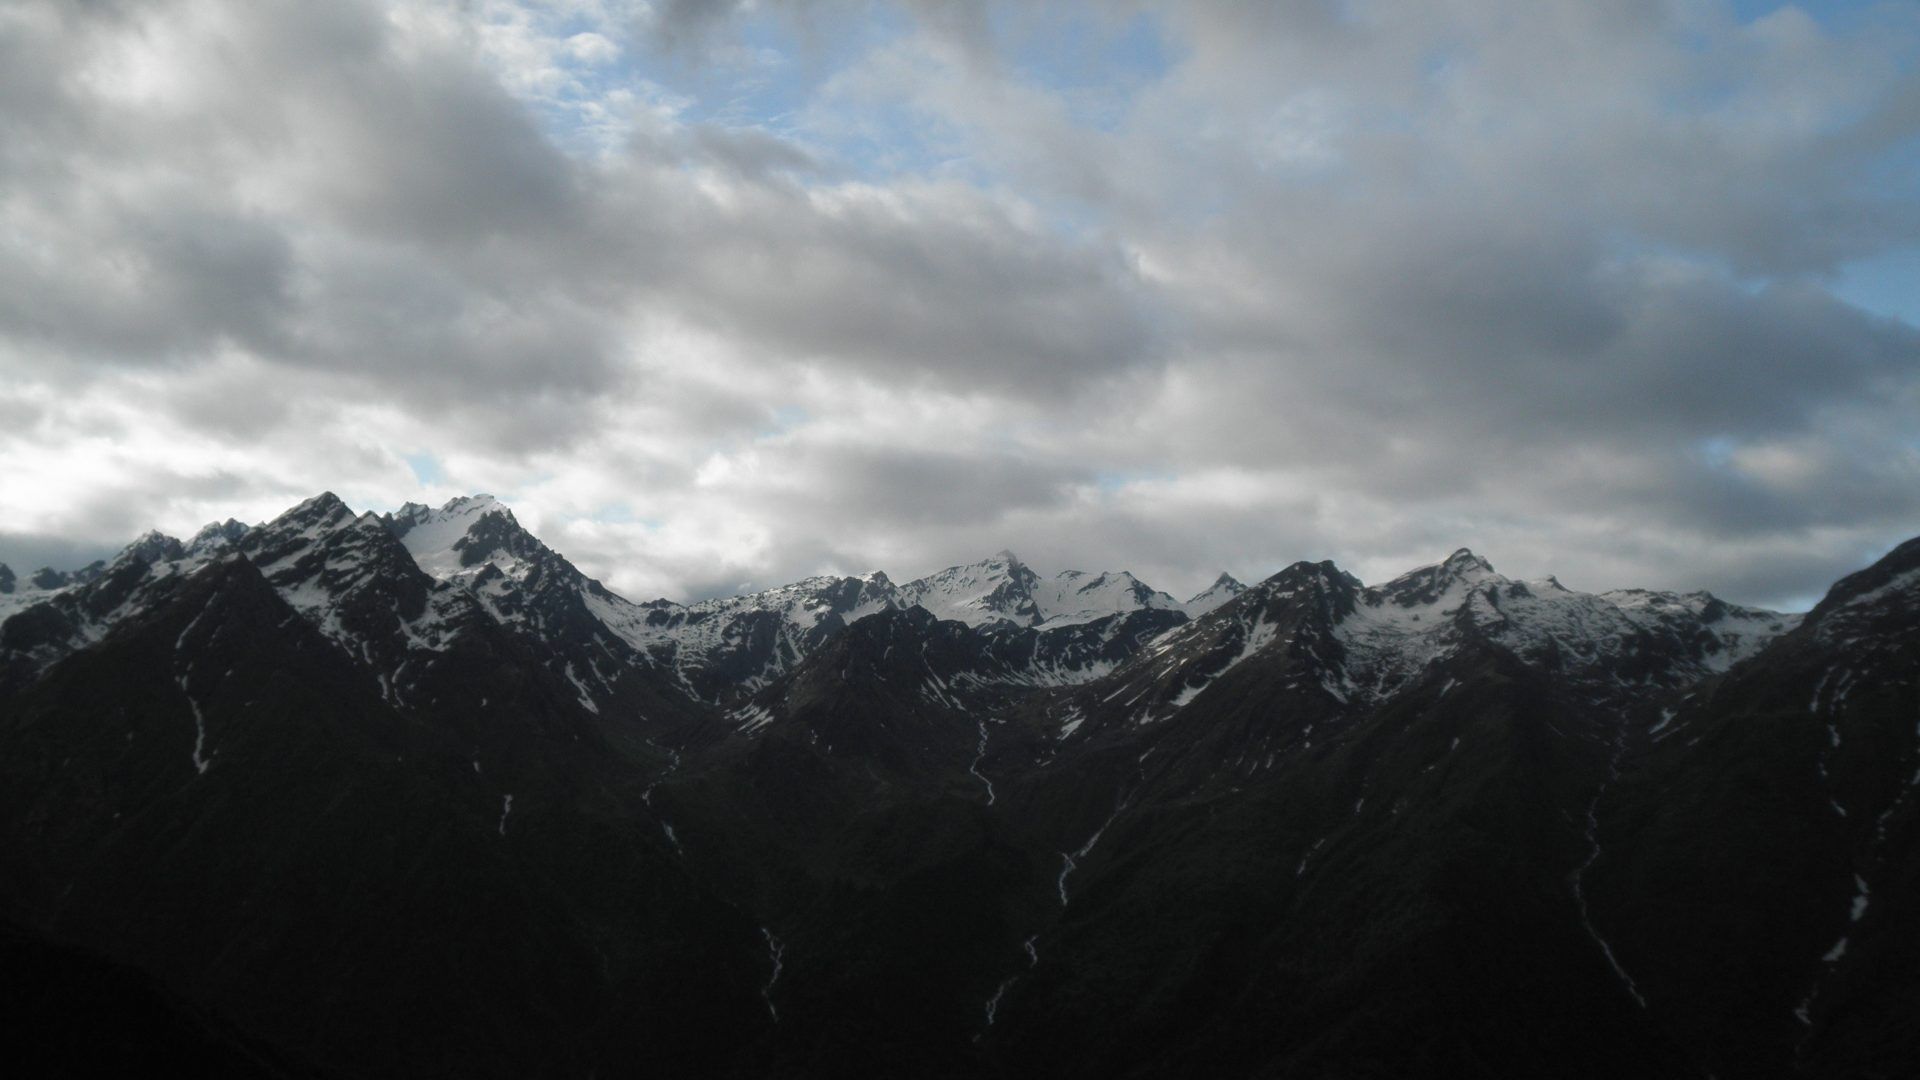 A view of the mountains from the Milford Road. - Mountain